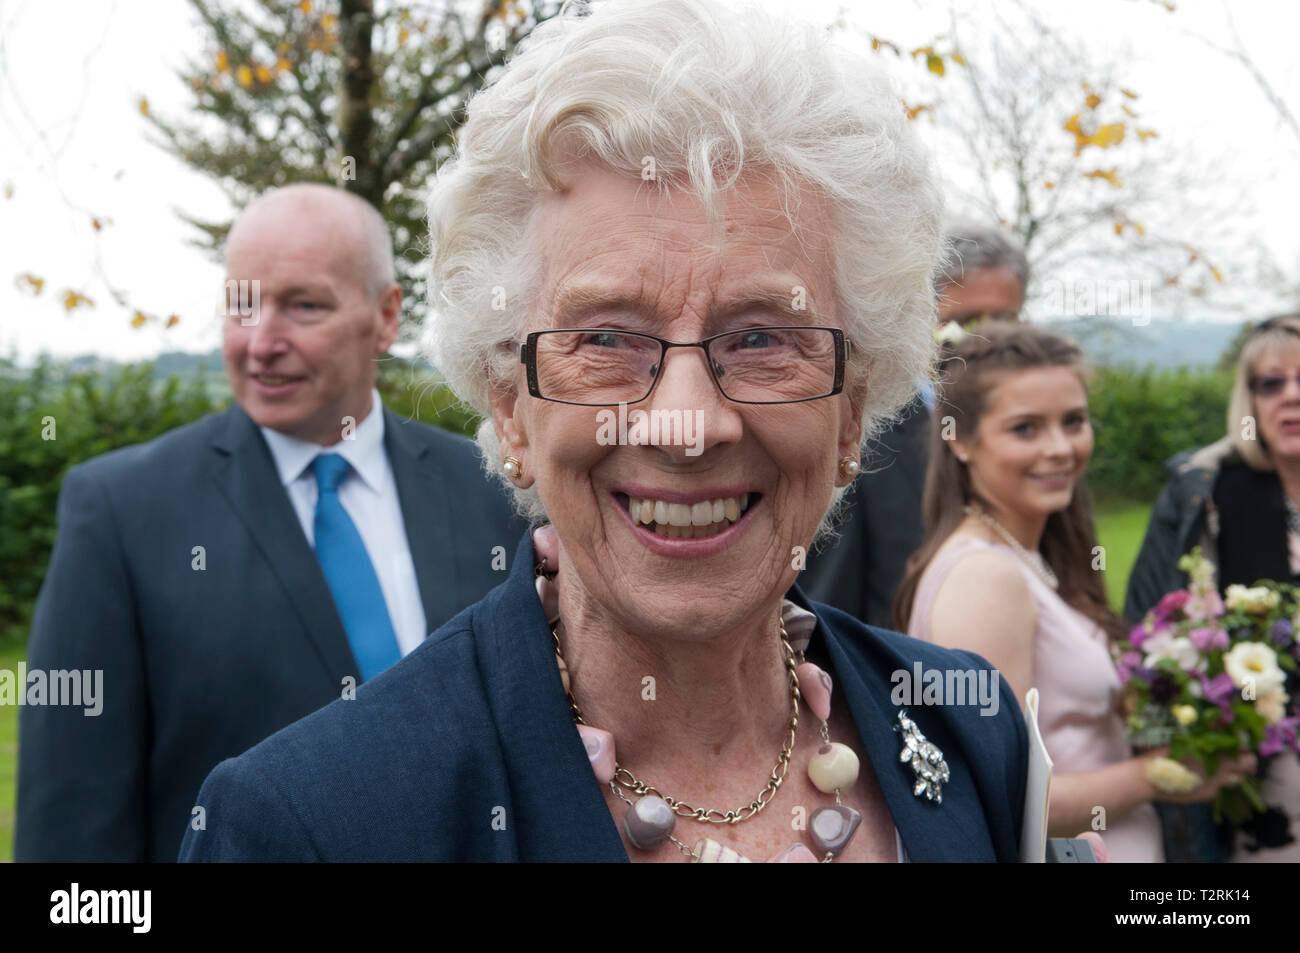 Portrait of happy smiling elderly woman at a special occasion Stock Photo